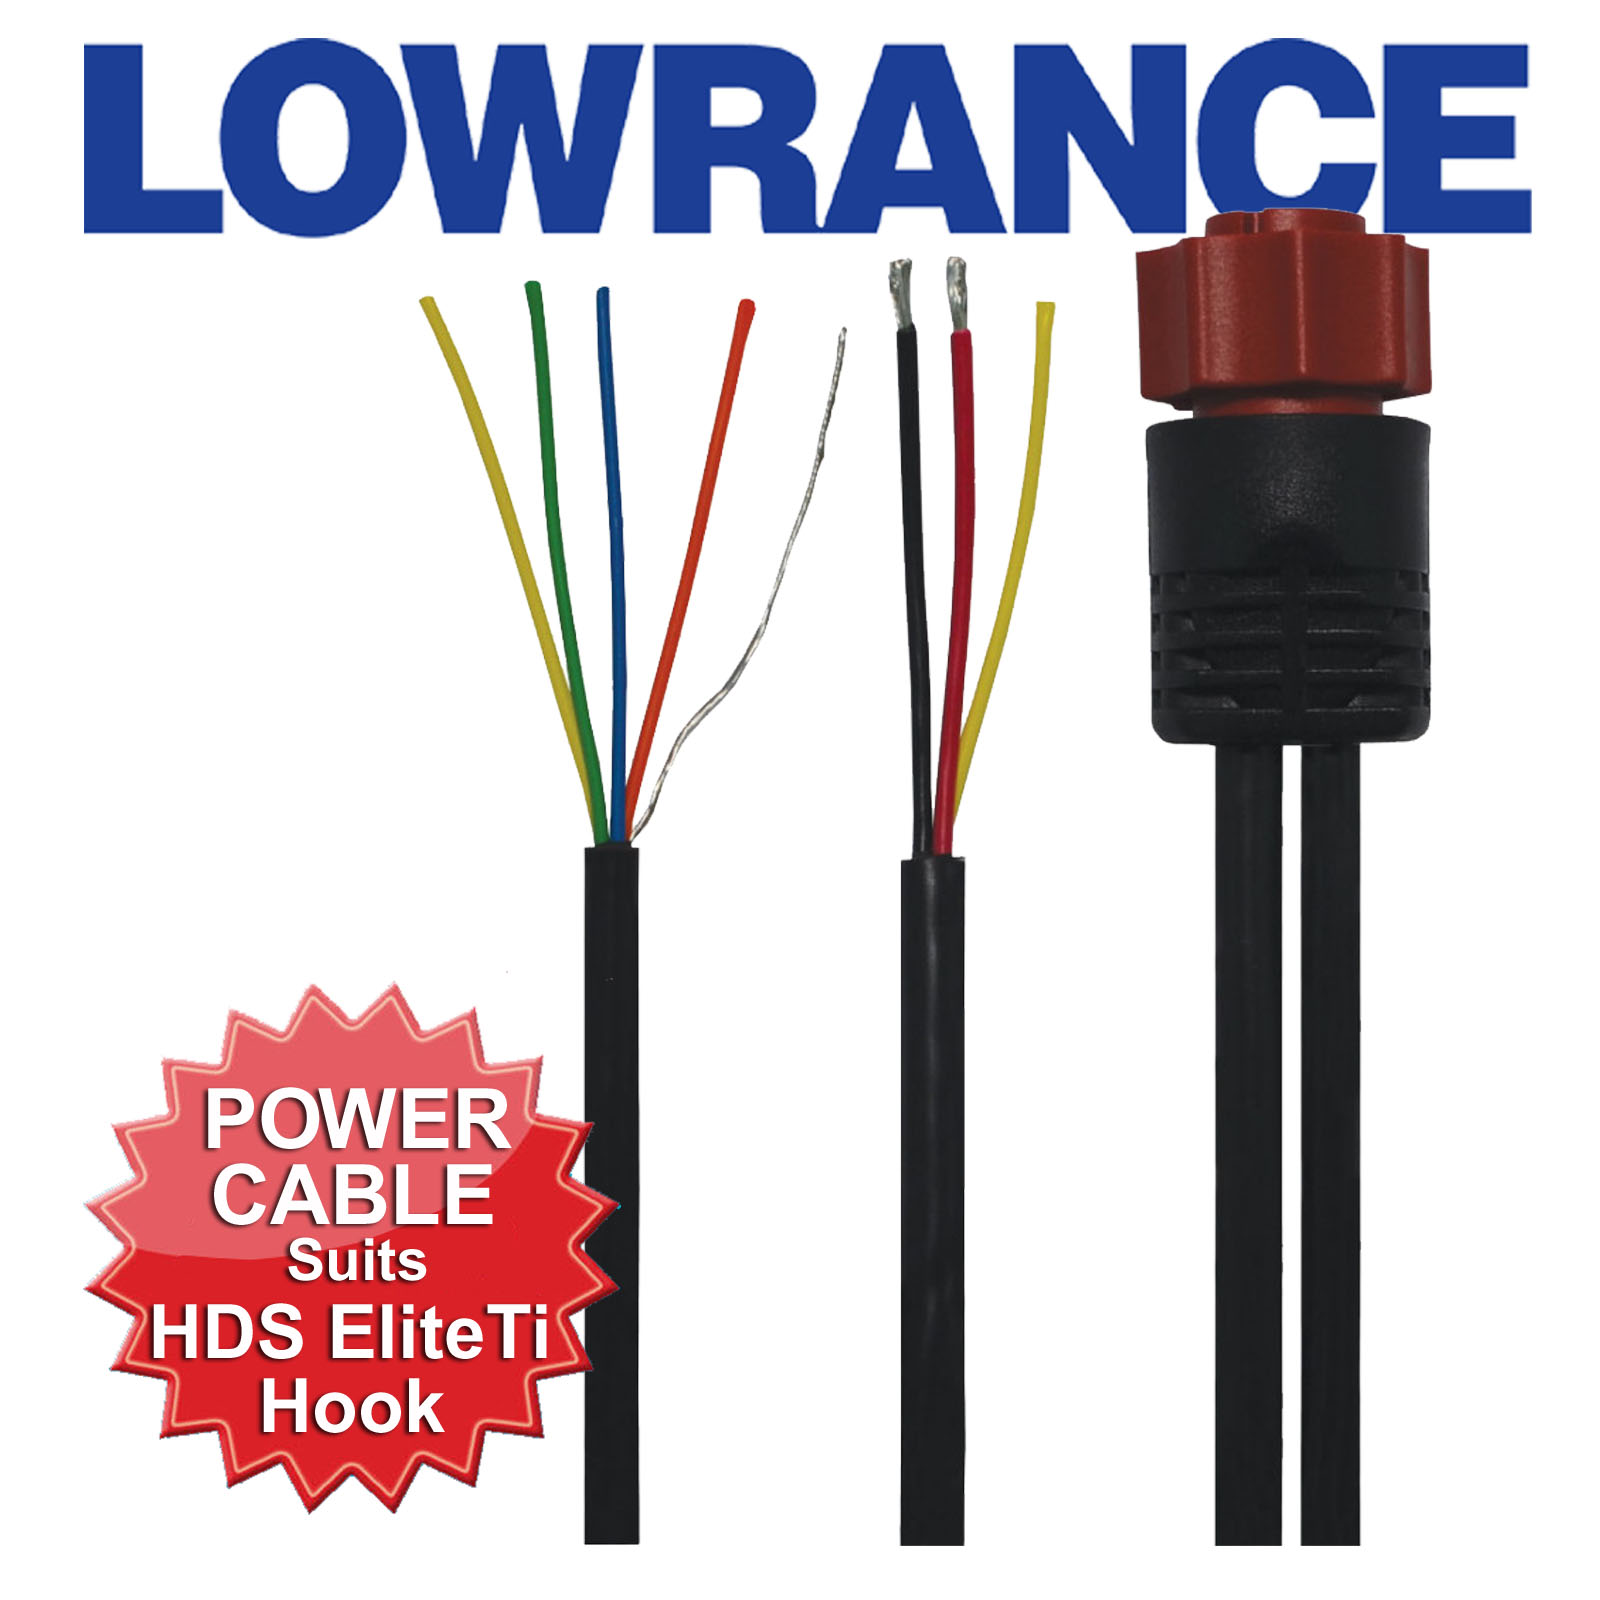 Lowrance 000-0127-49 Power Cable for sale online